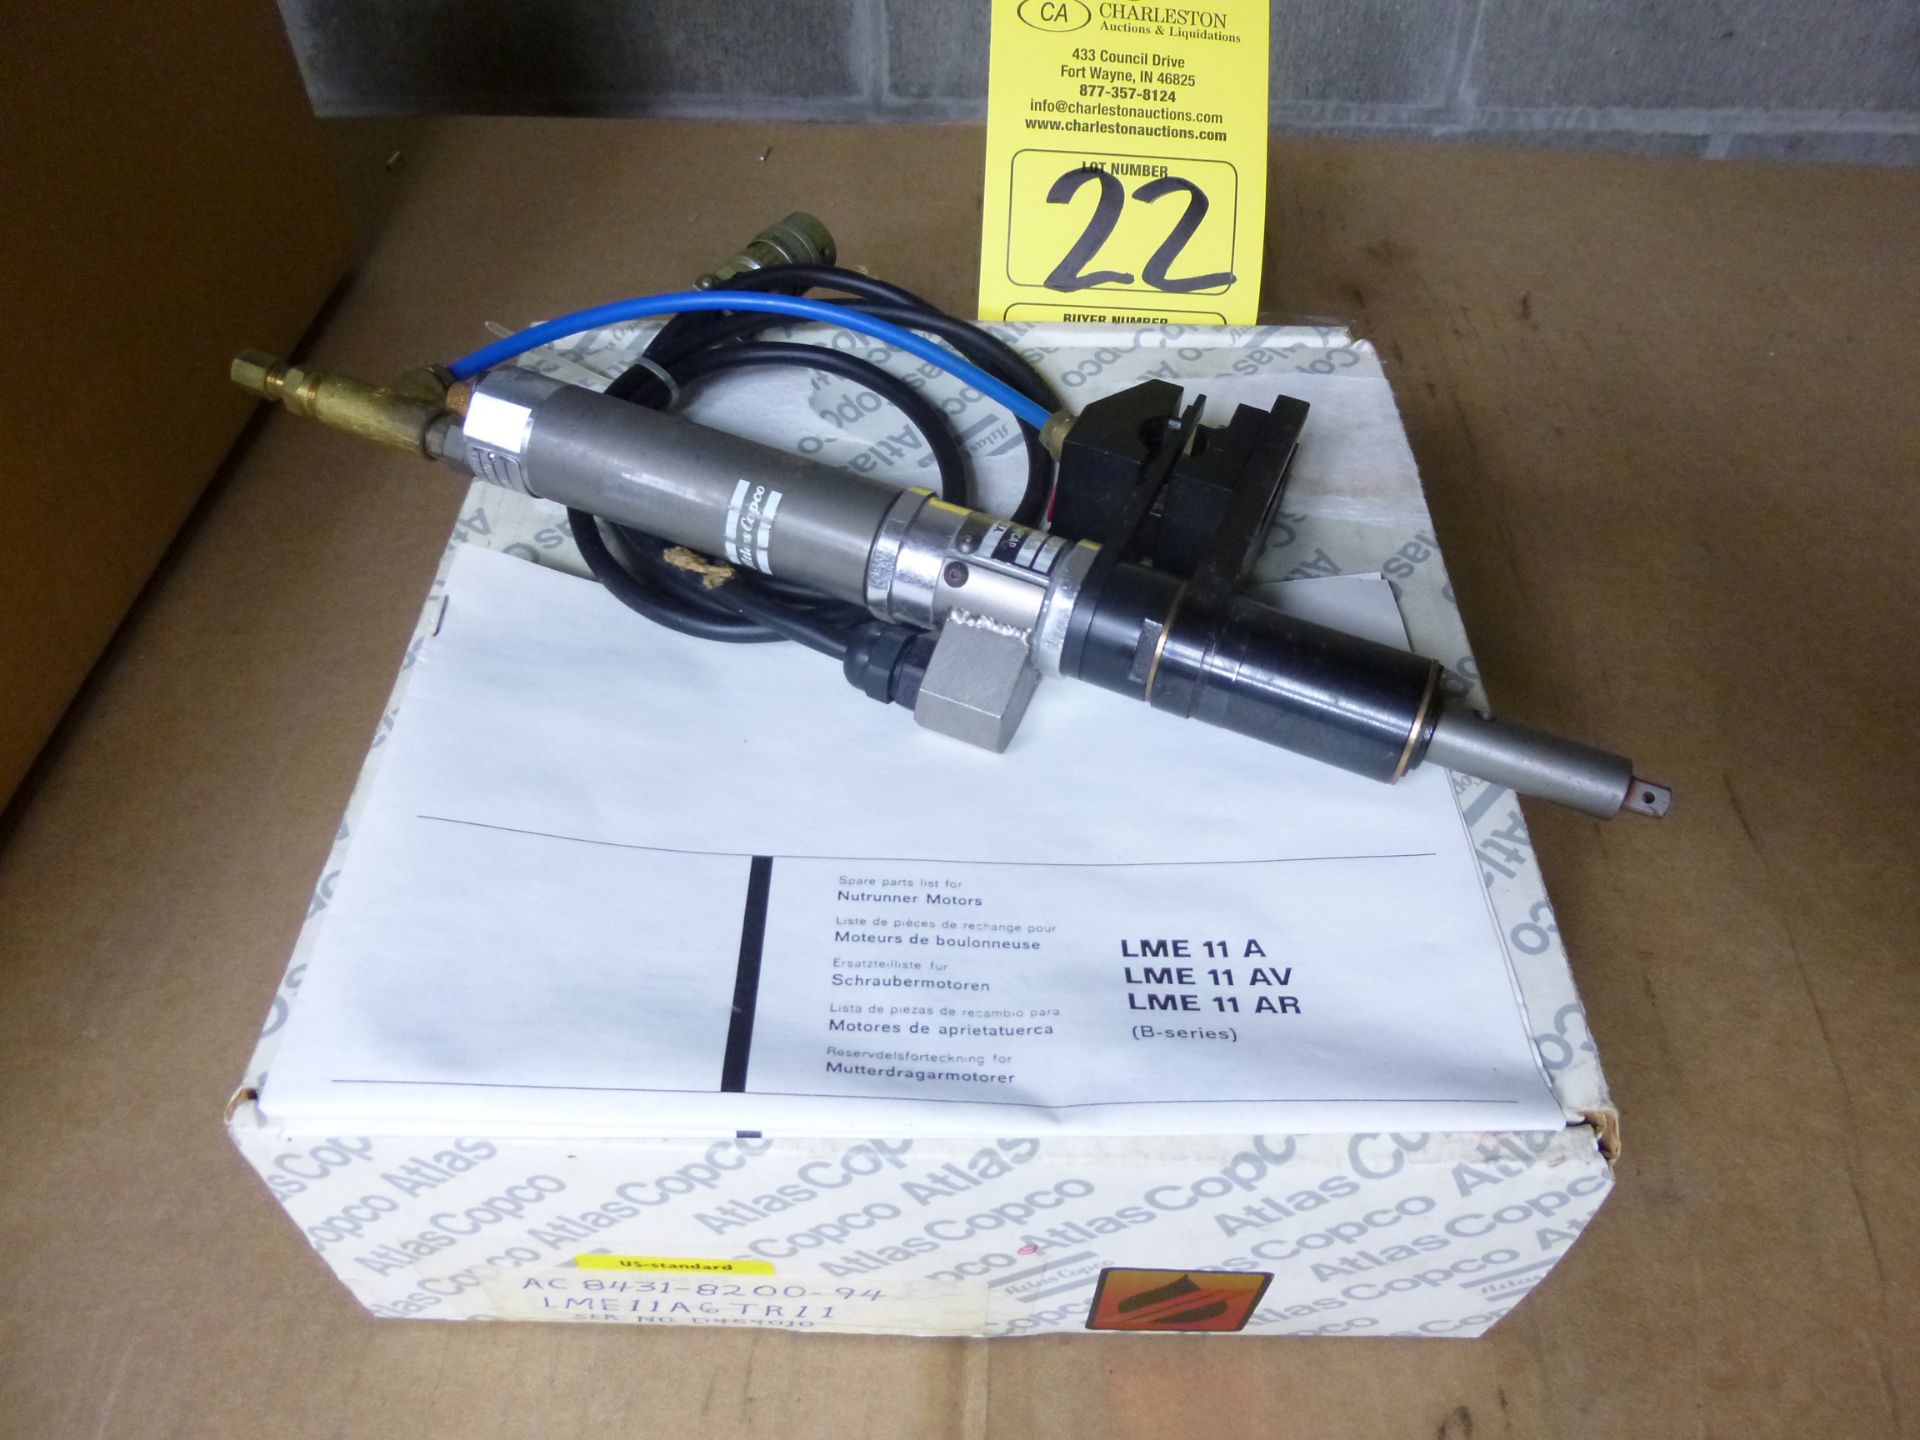 Atlas Copco electric inline nutrunner LME11A6TR11 w/ GES 060125-01100 (new in box) Shipping can be